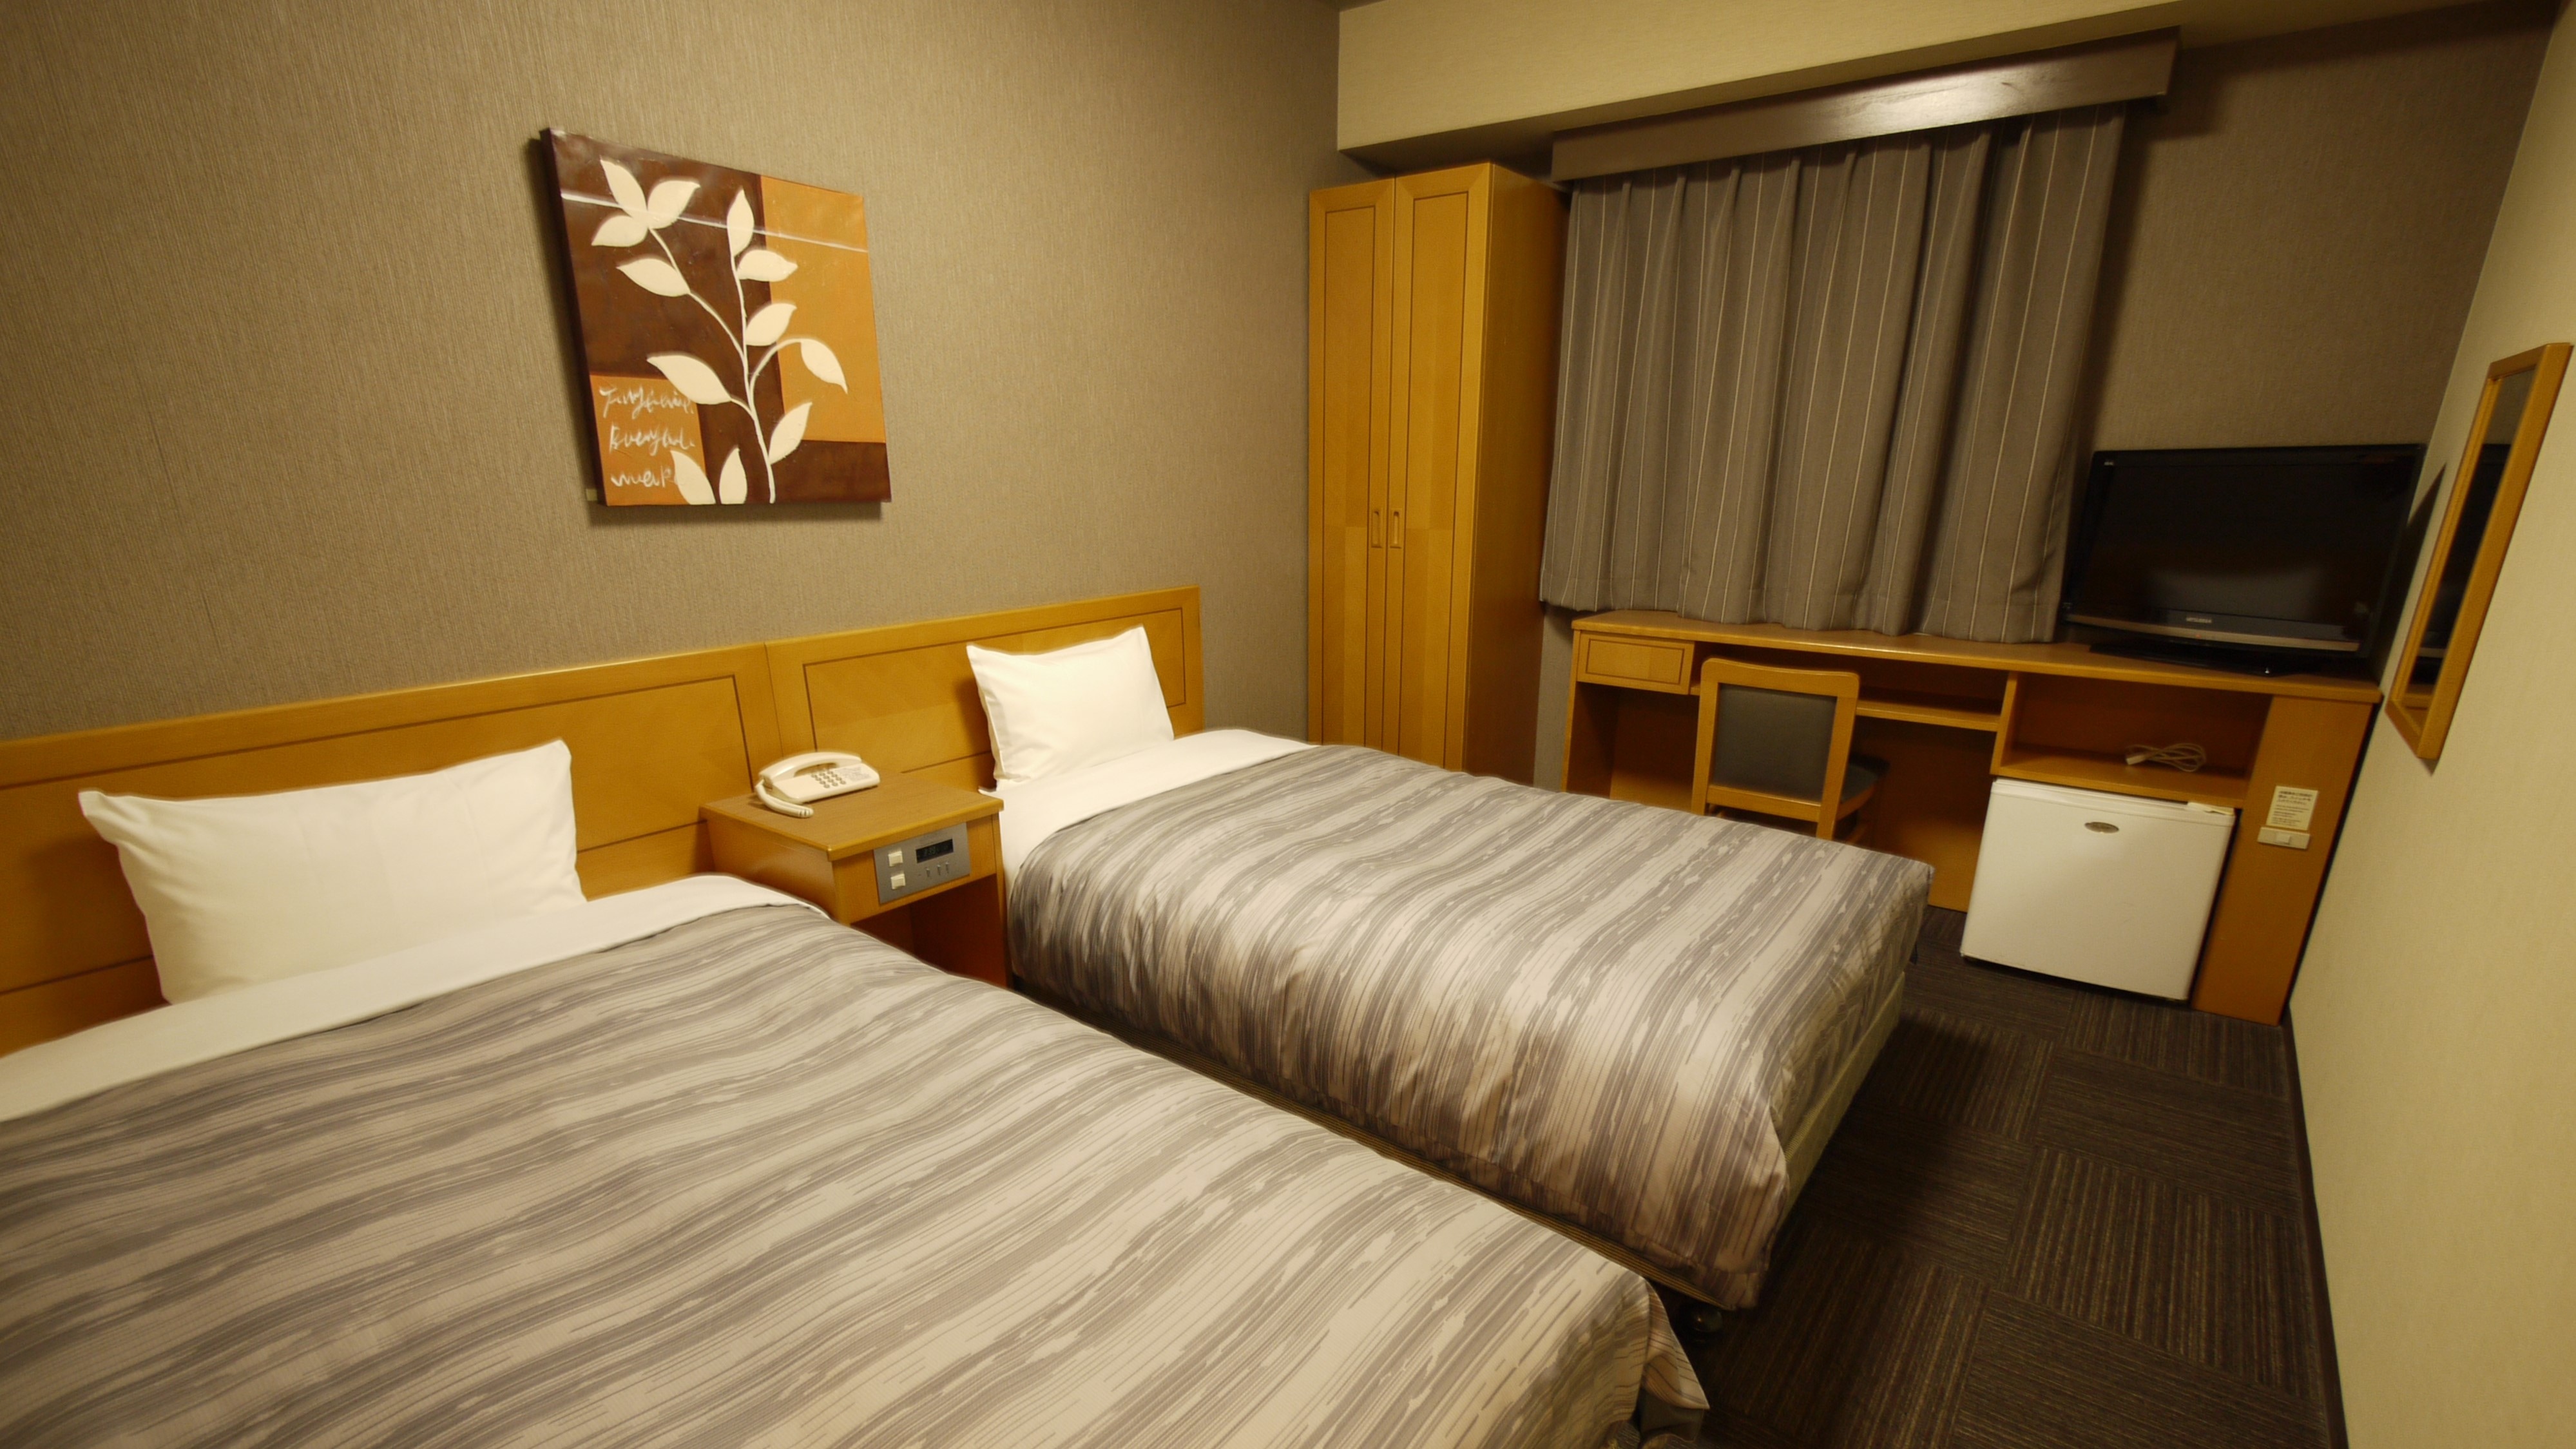 Twin room (approx. 14㎡) convenient for family trips